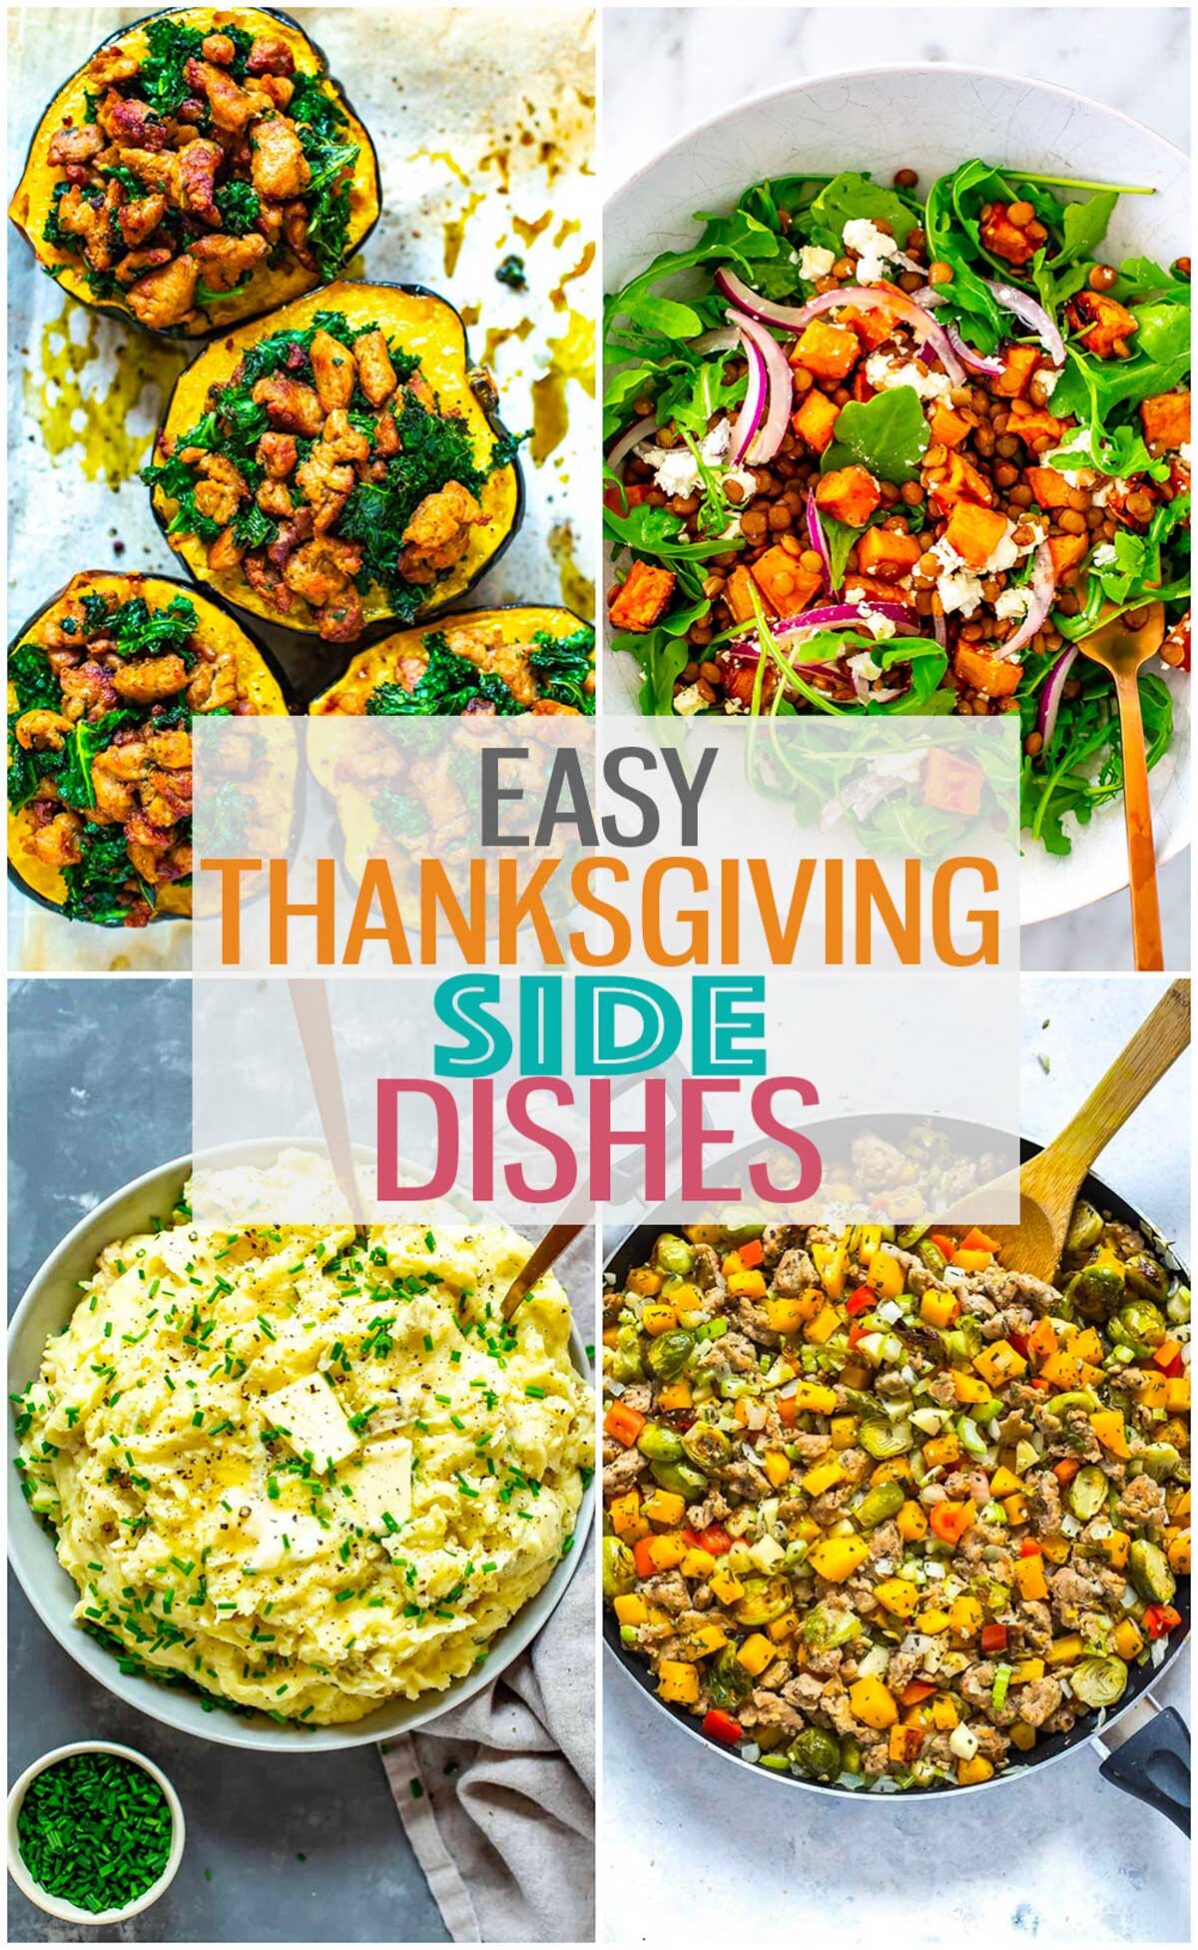 A collage of four different Thanksgiving side dishes with the text "Easy Thanksgiving Side Dishes" layered over top.